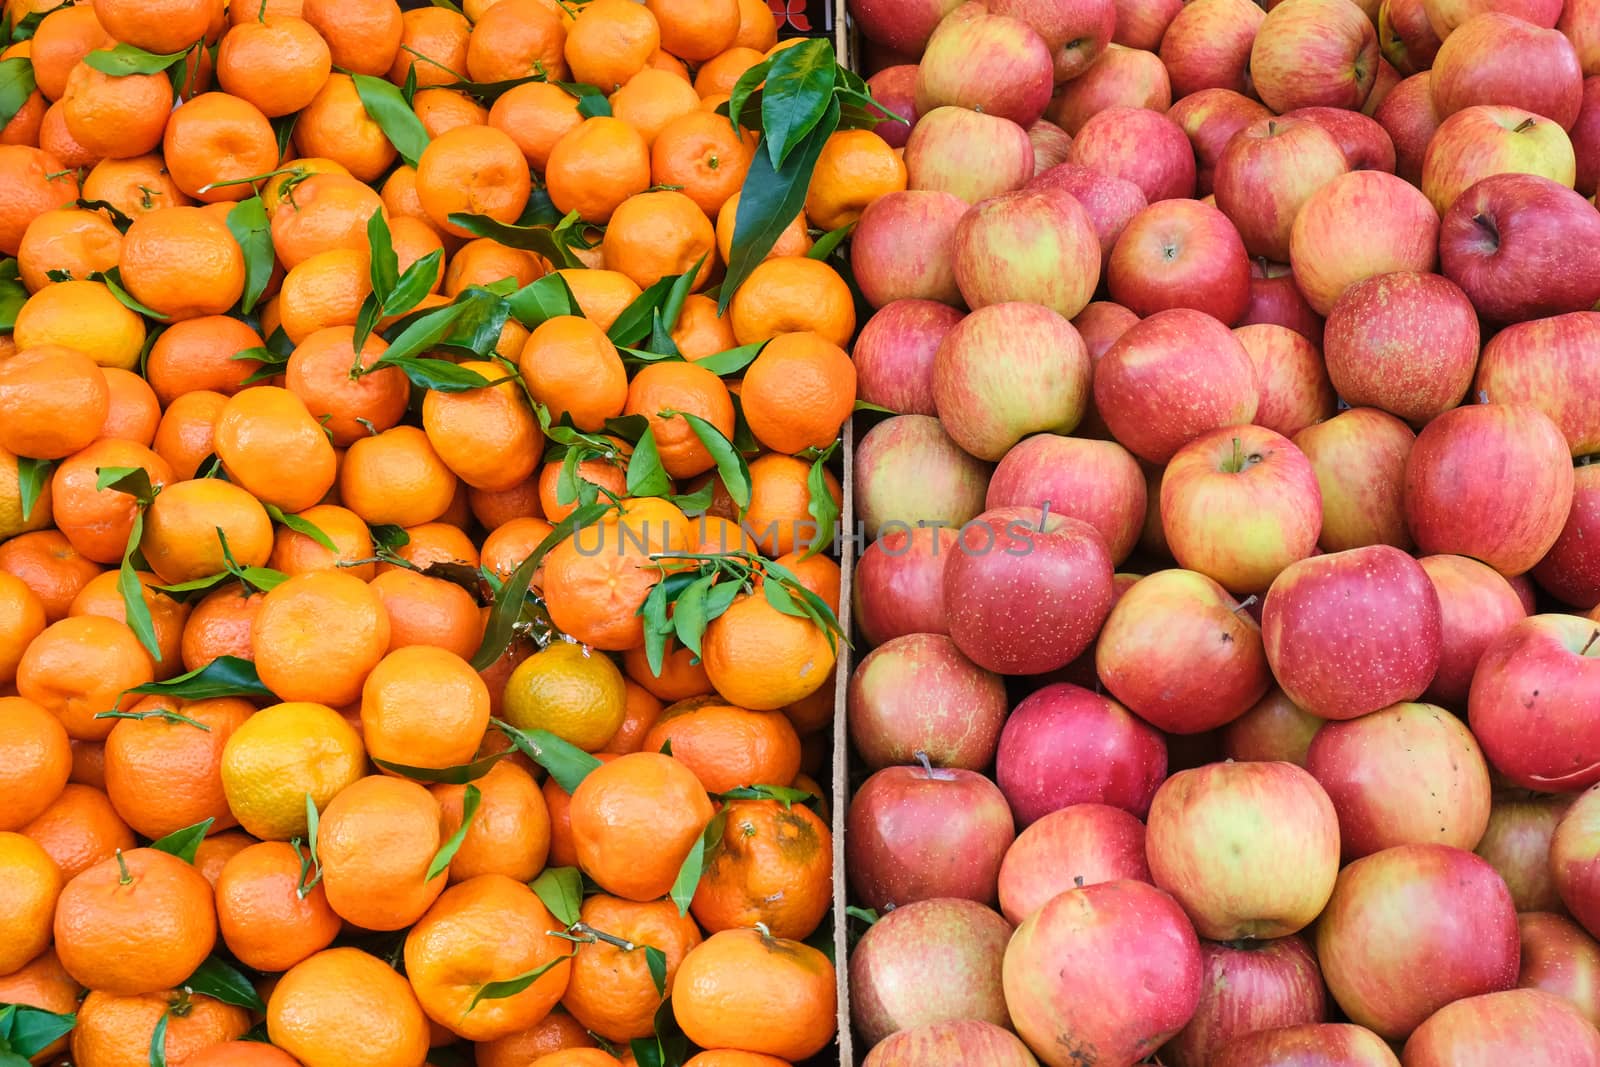 Tangerines and apples by elxeneize